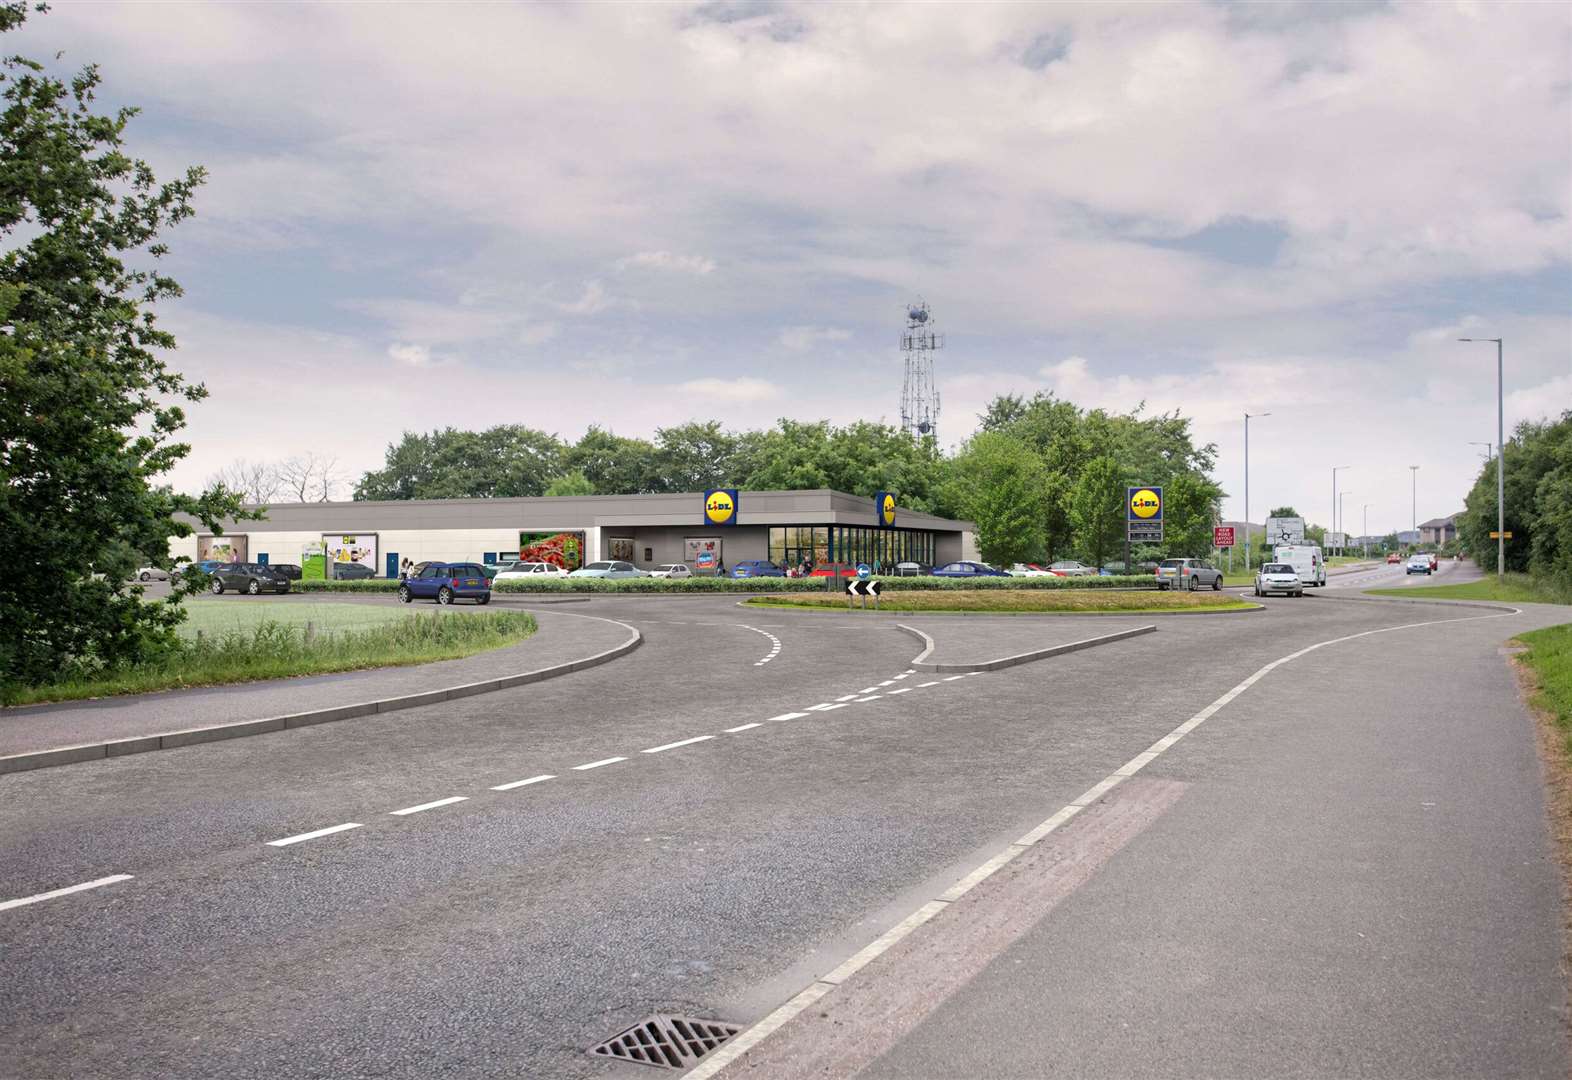 Lidl is carrying out a community consultation for plans to build a new supermarket near Inshes roundabout.